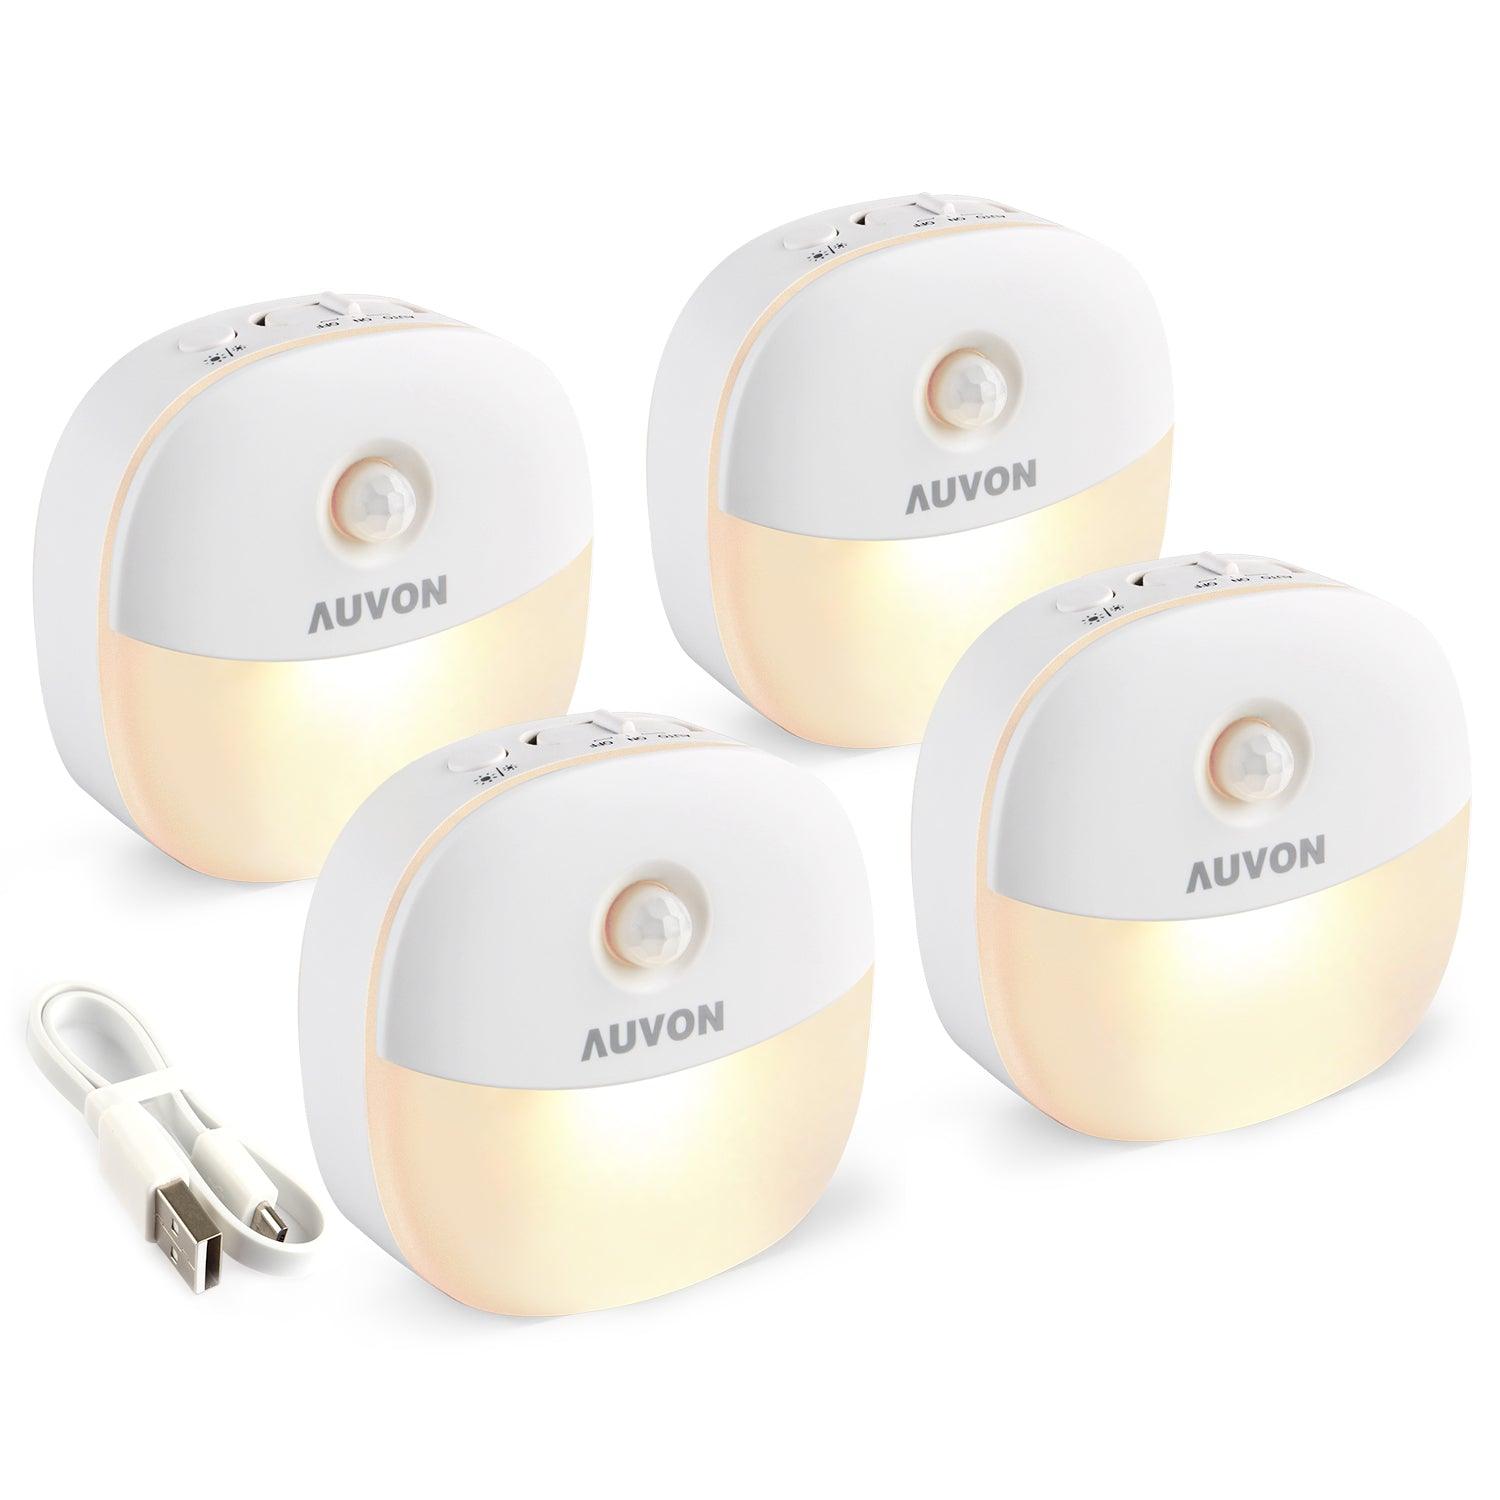 AUVON Rechargeable Mini Motion Sensor Night Light, 2nd Gen Warm White LED Stick-On Closet Light with Dusk to Dawn Sensor, Adjustable Brightness for Wall, Stairs, Cabinet, Hallway (4 Pack) - AUVON